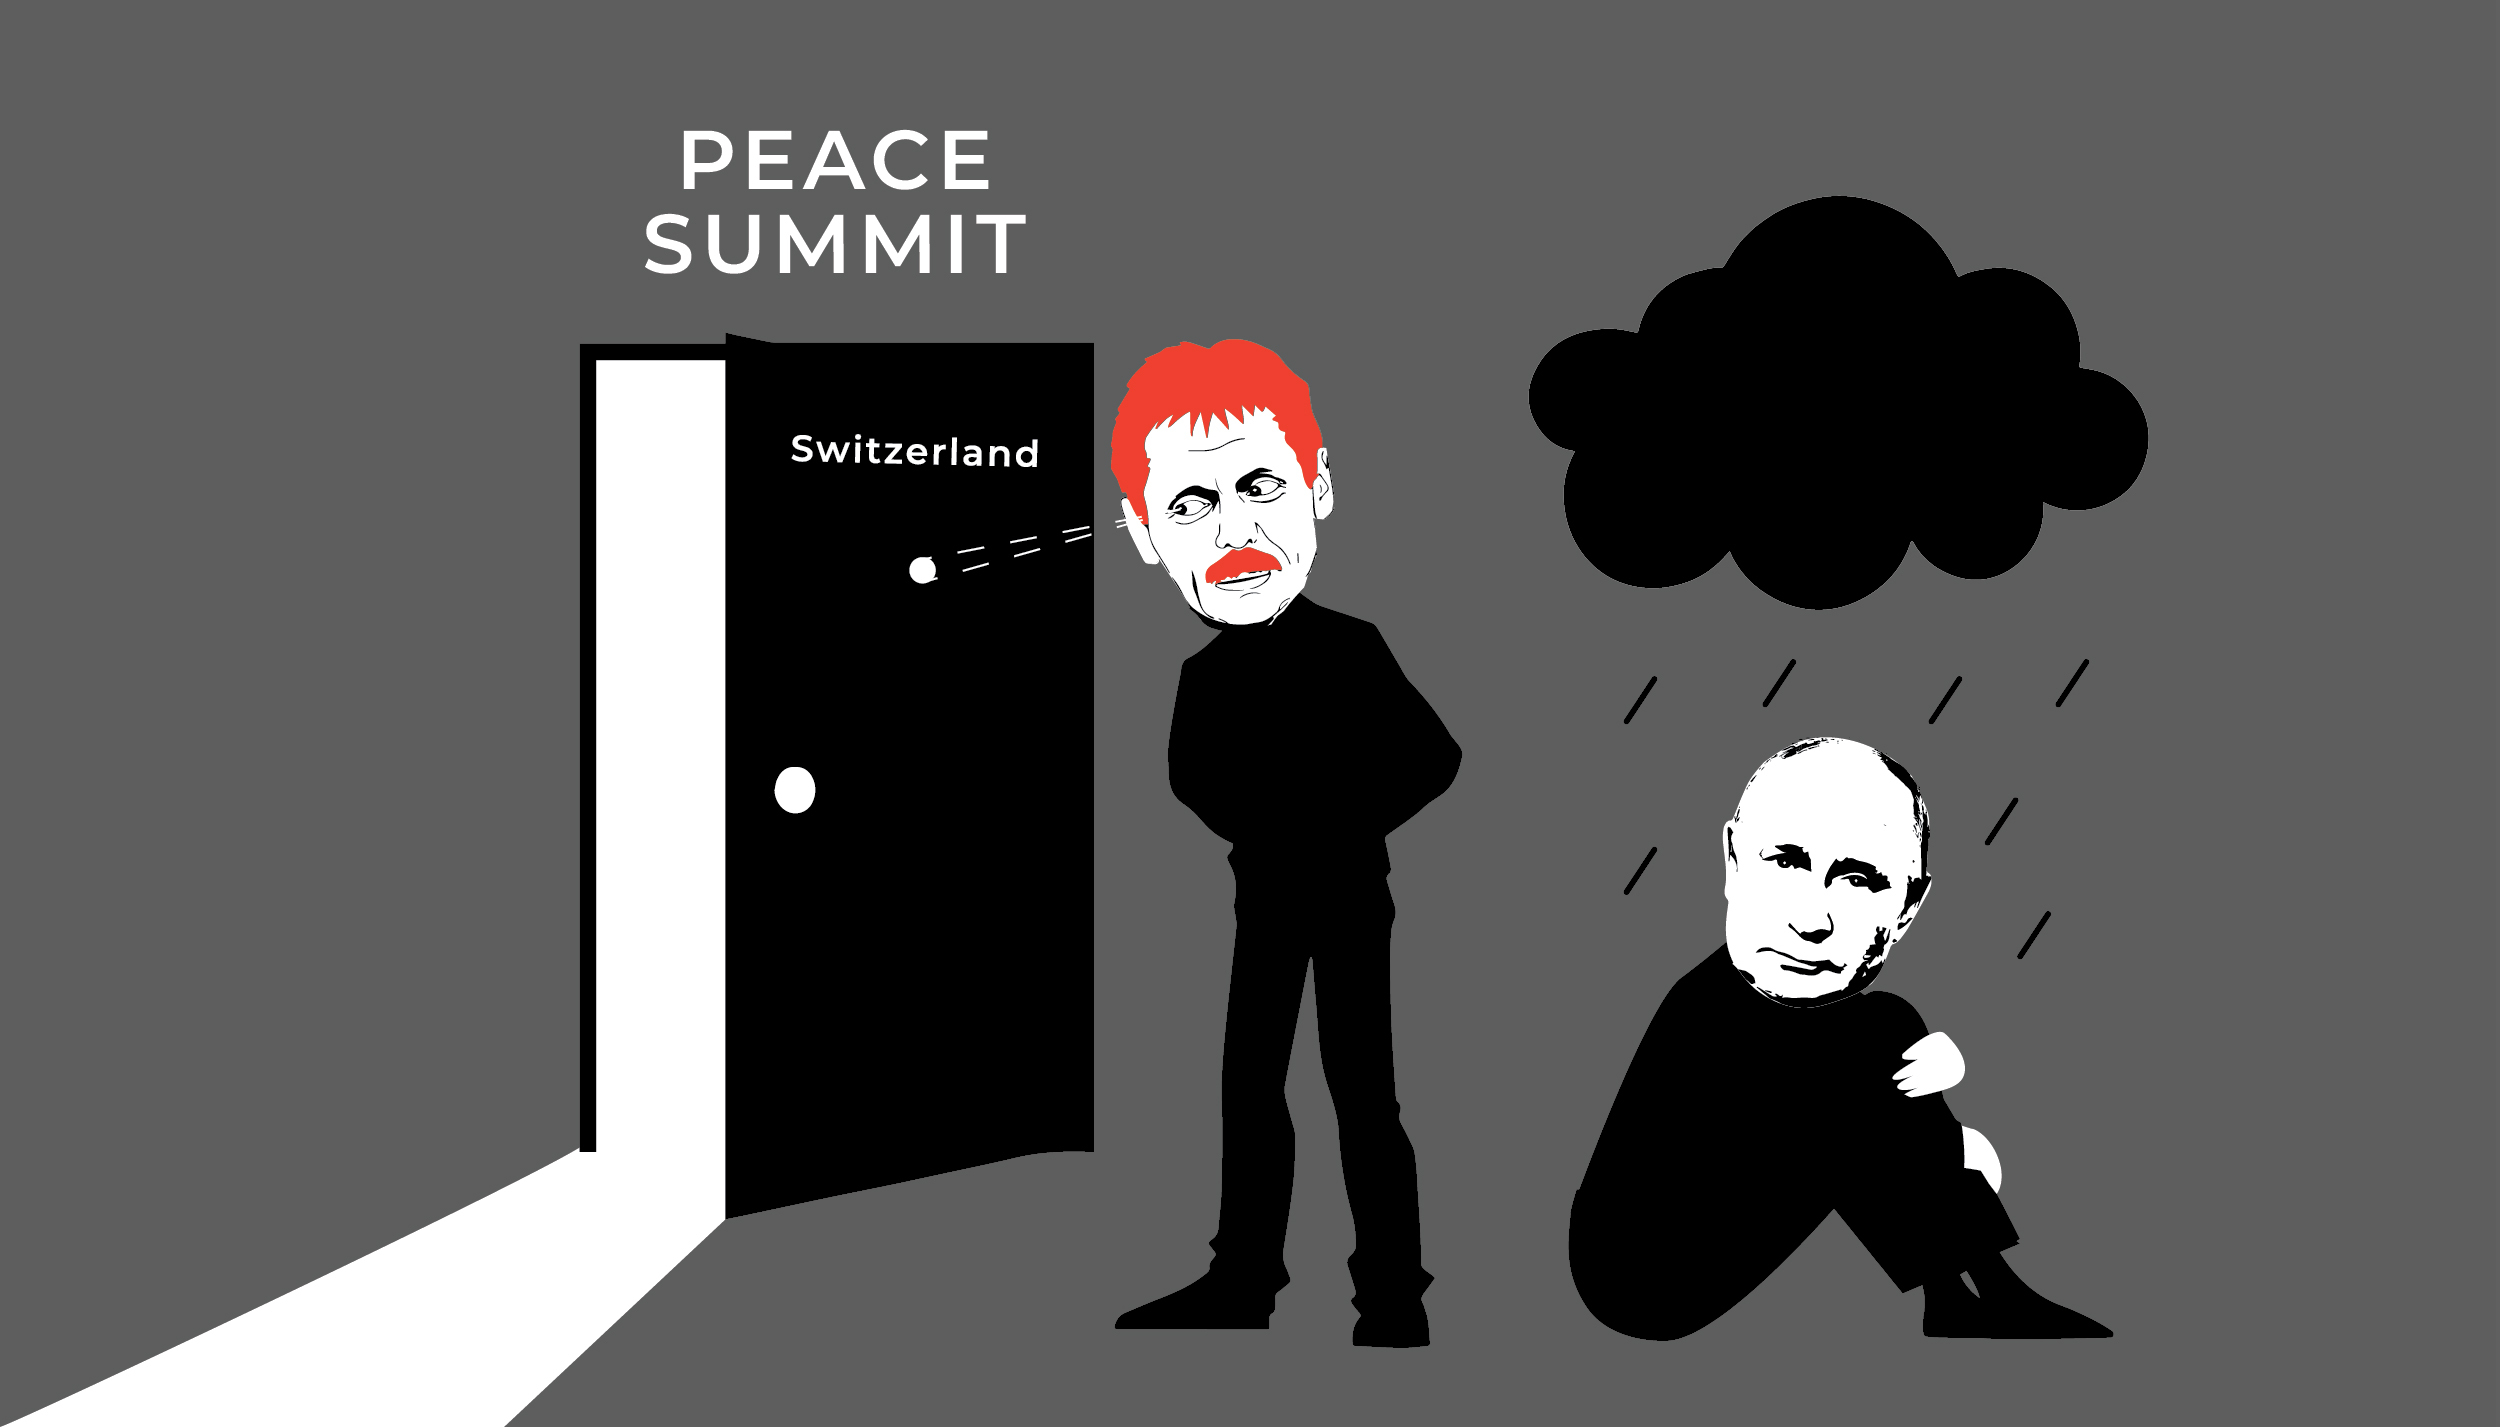 Image: "Doves of Peace" and the "Swiss Fake": Russia's Attempts to Undermine the Global Peace Summit